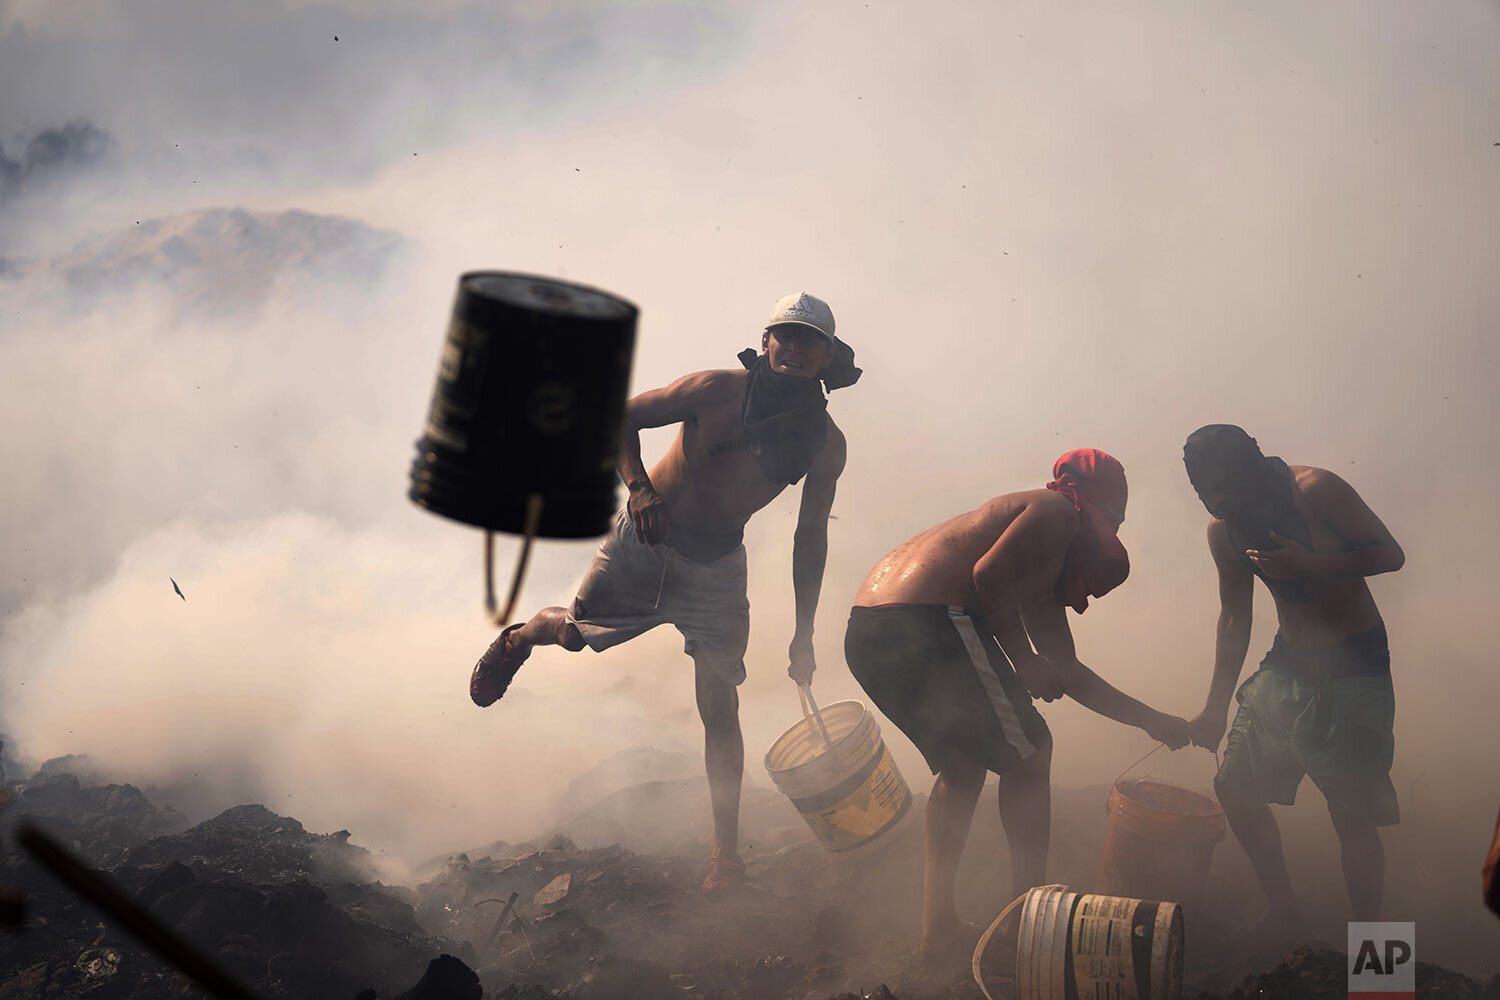  Residents fight a fire with buckets of water in Santa Ana, poor neighborhood of Asuncion, Paraguay, Aug. 19, 2021. The fire was started by people burning trash, but it spread and destroyed at least a dozen homes. (AP Photo/Jorge Saenz) 